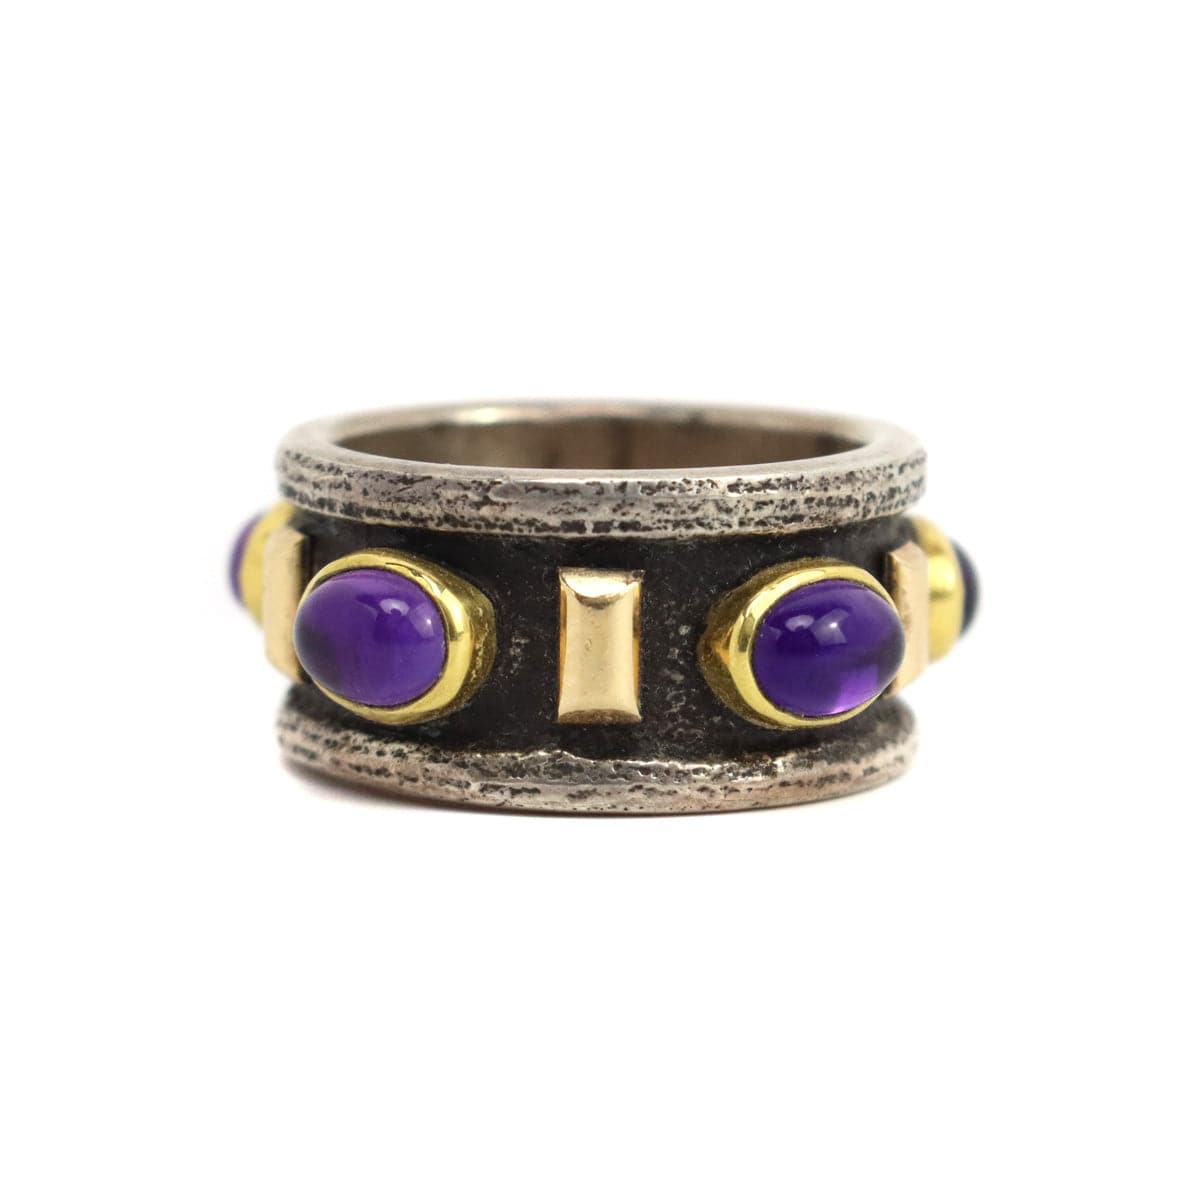 
Frank Patania Jr. - Amethyst and 14K Gold Ring, size 10 (J91699-0123-017)